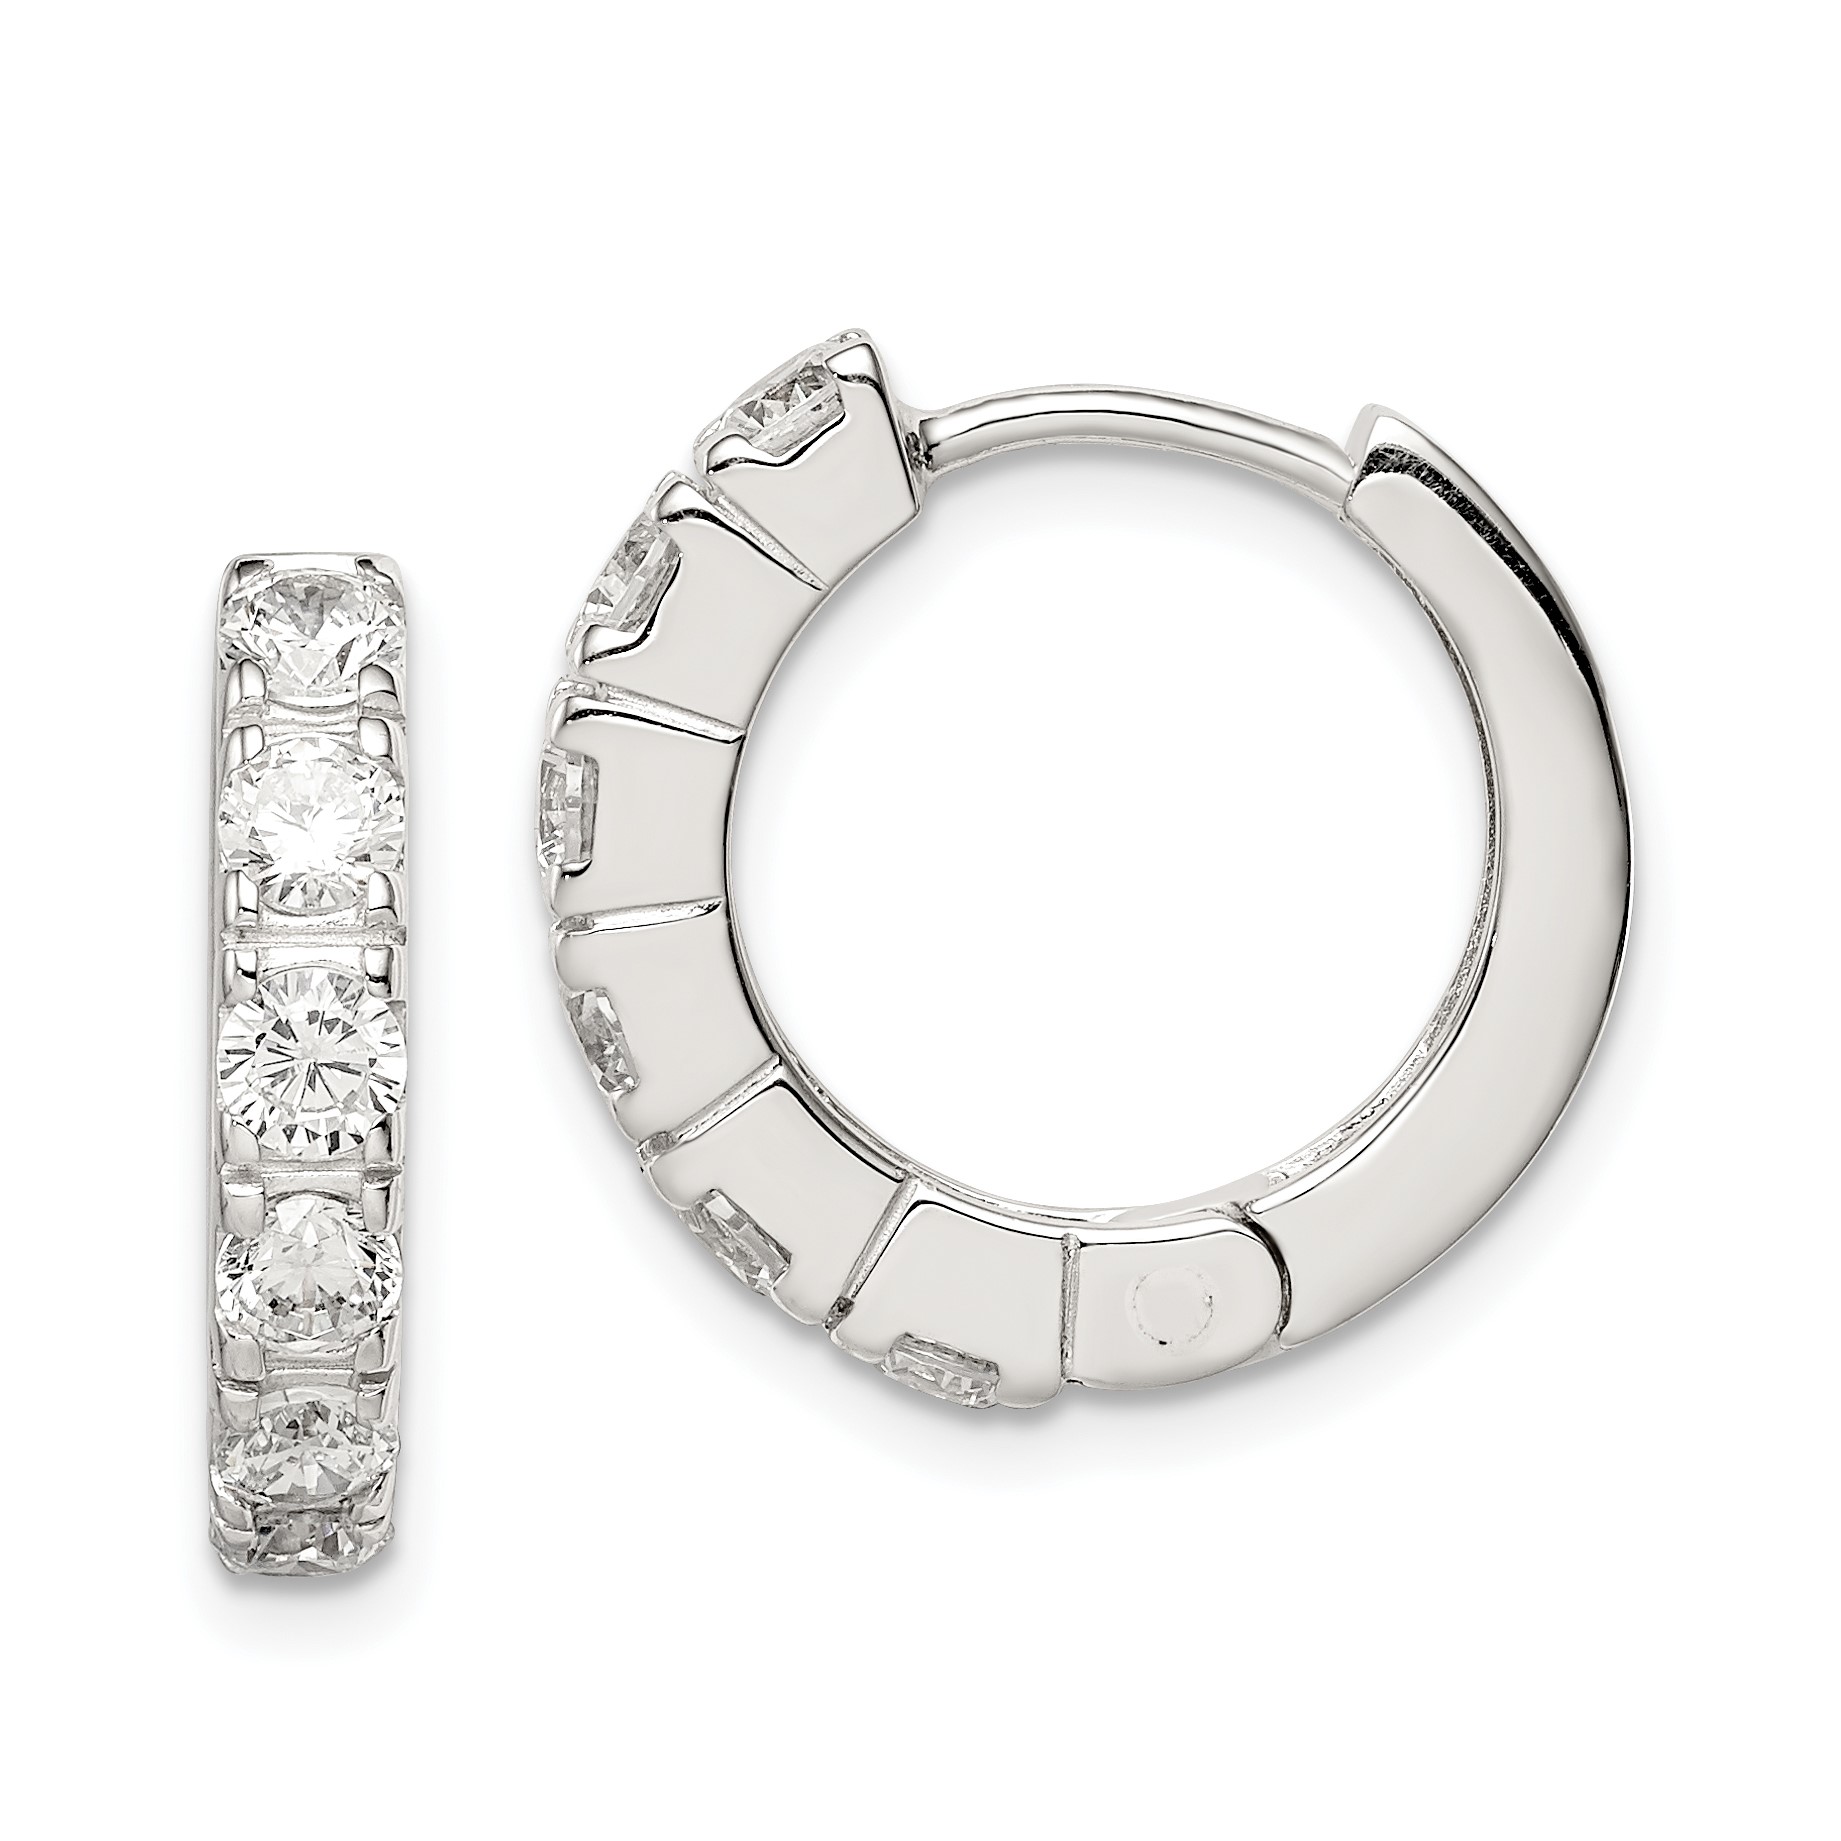 31mm x 30mm Jewel Tie Sterling Silver CZ Cubic Zirconia In and Out Hinged Hoop Earrings 